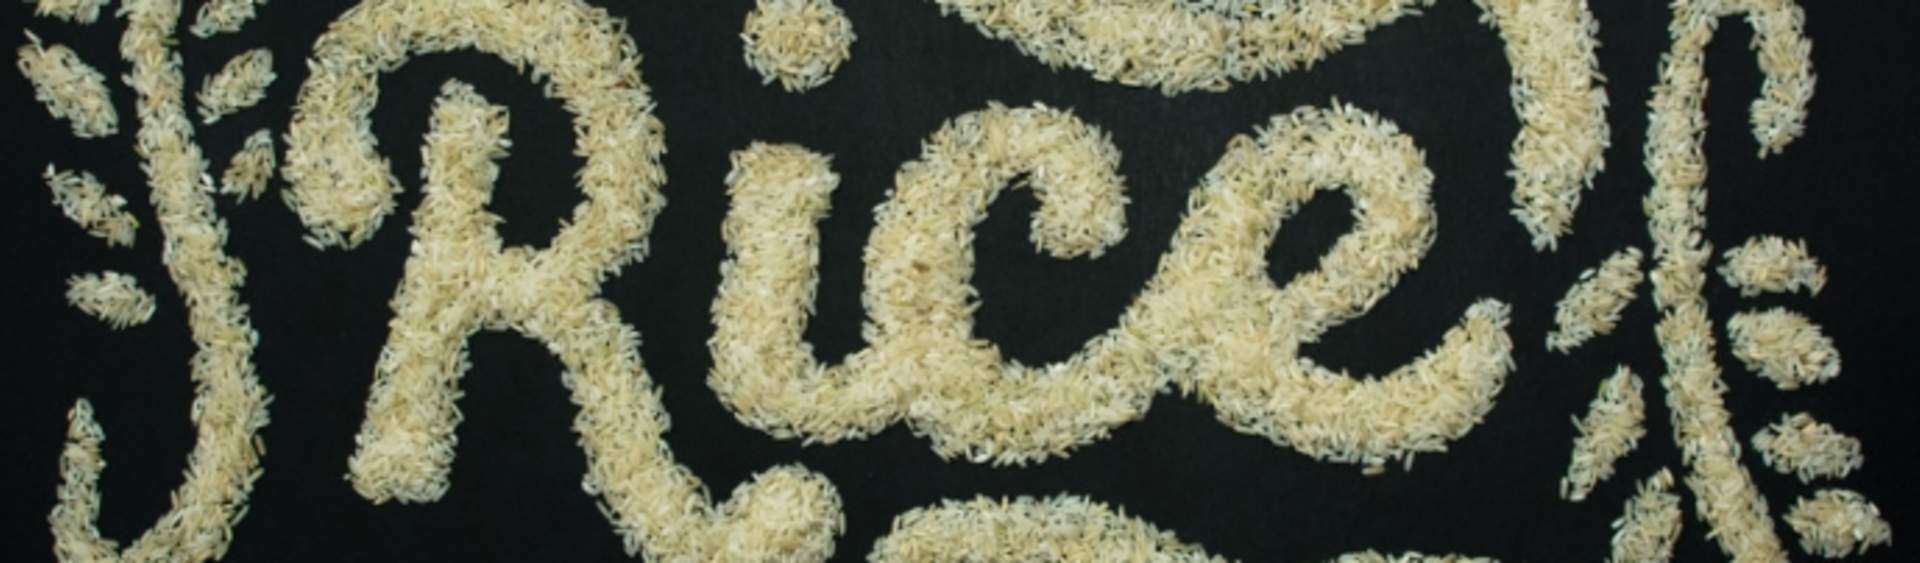 Rice processor to expand in Louisiana